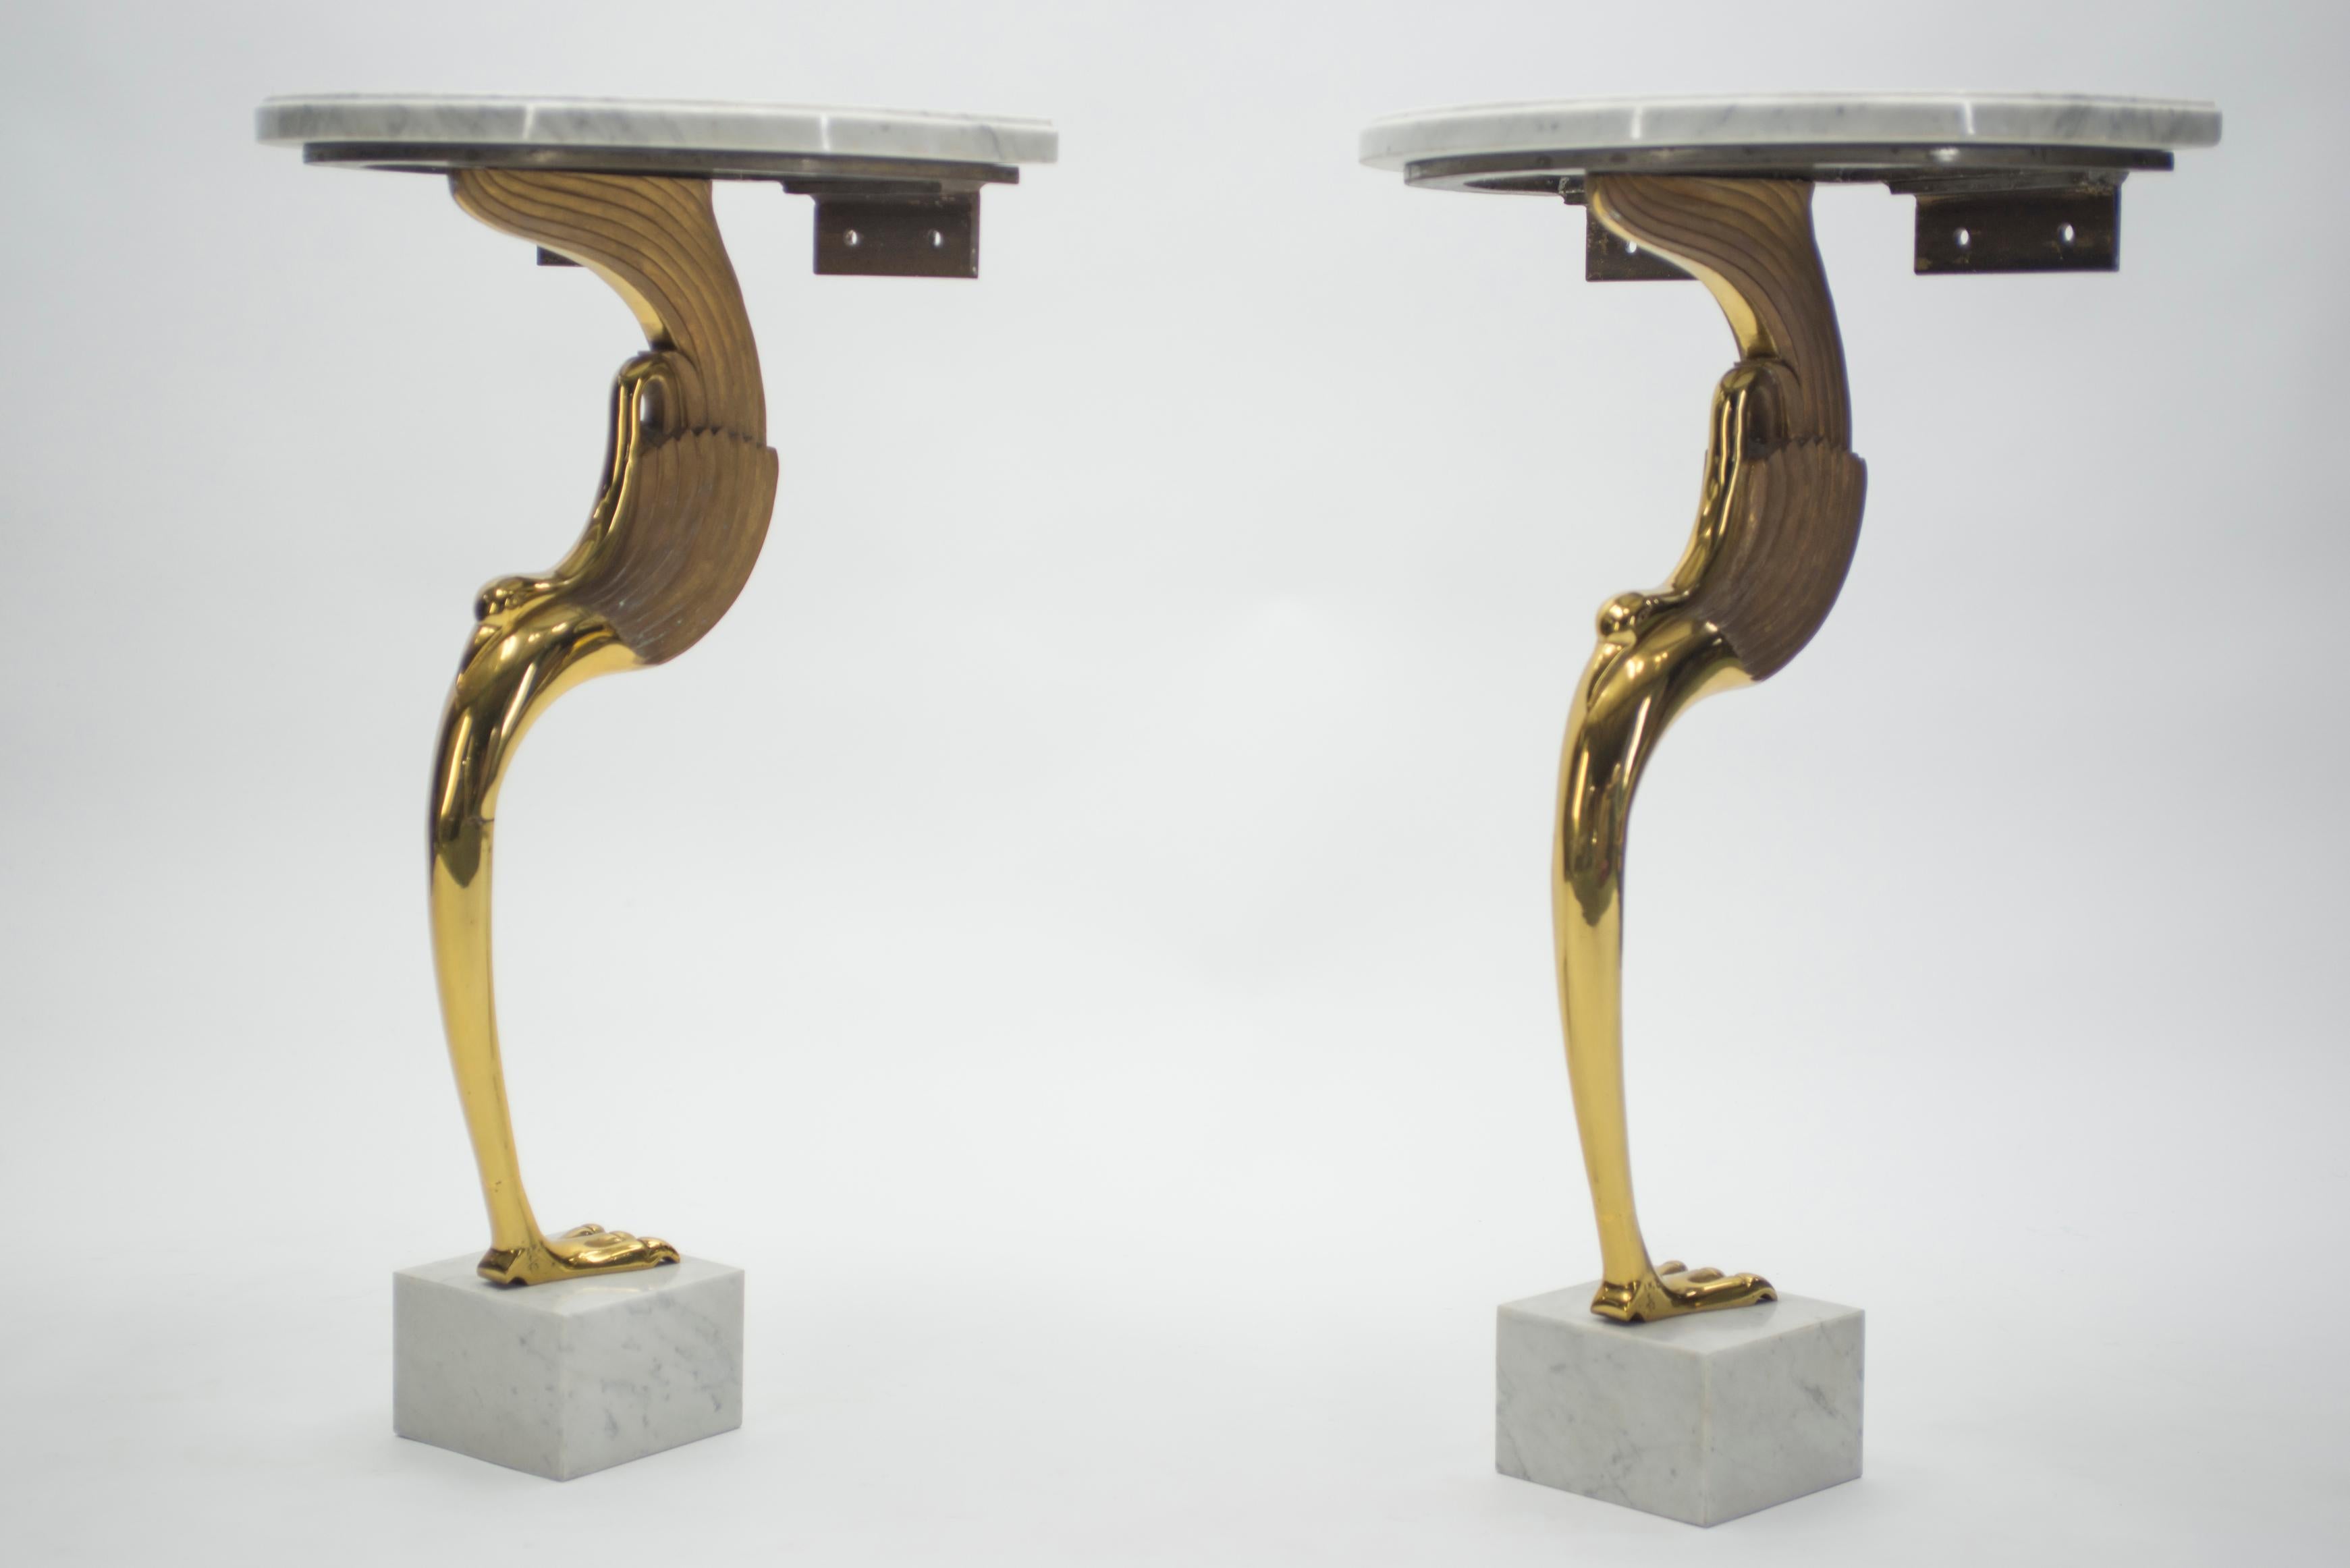 French Rare Midcentury Pair of Brass Marble Console Tables Robert Thibier, 1970s